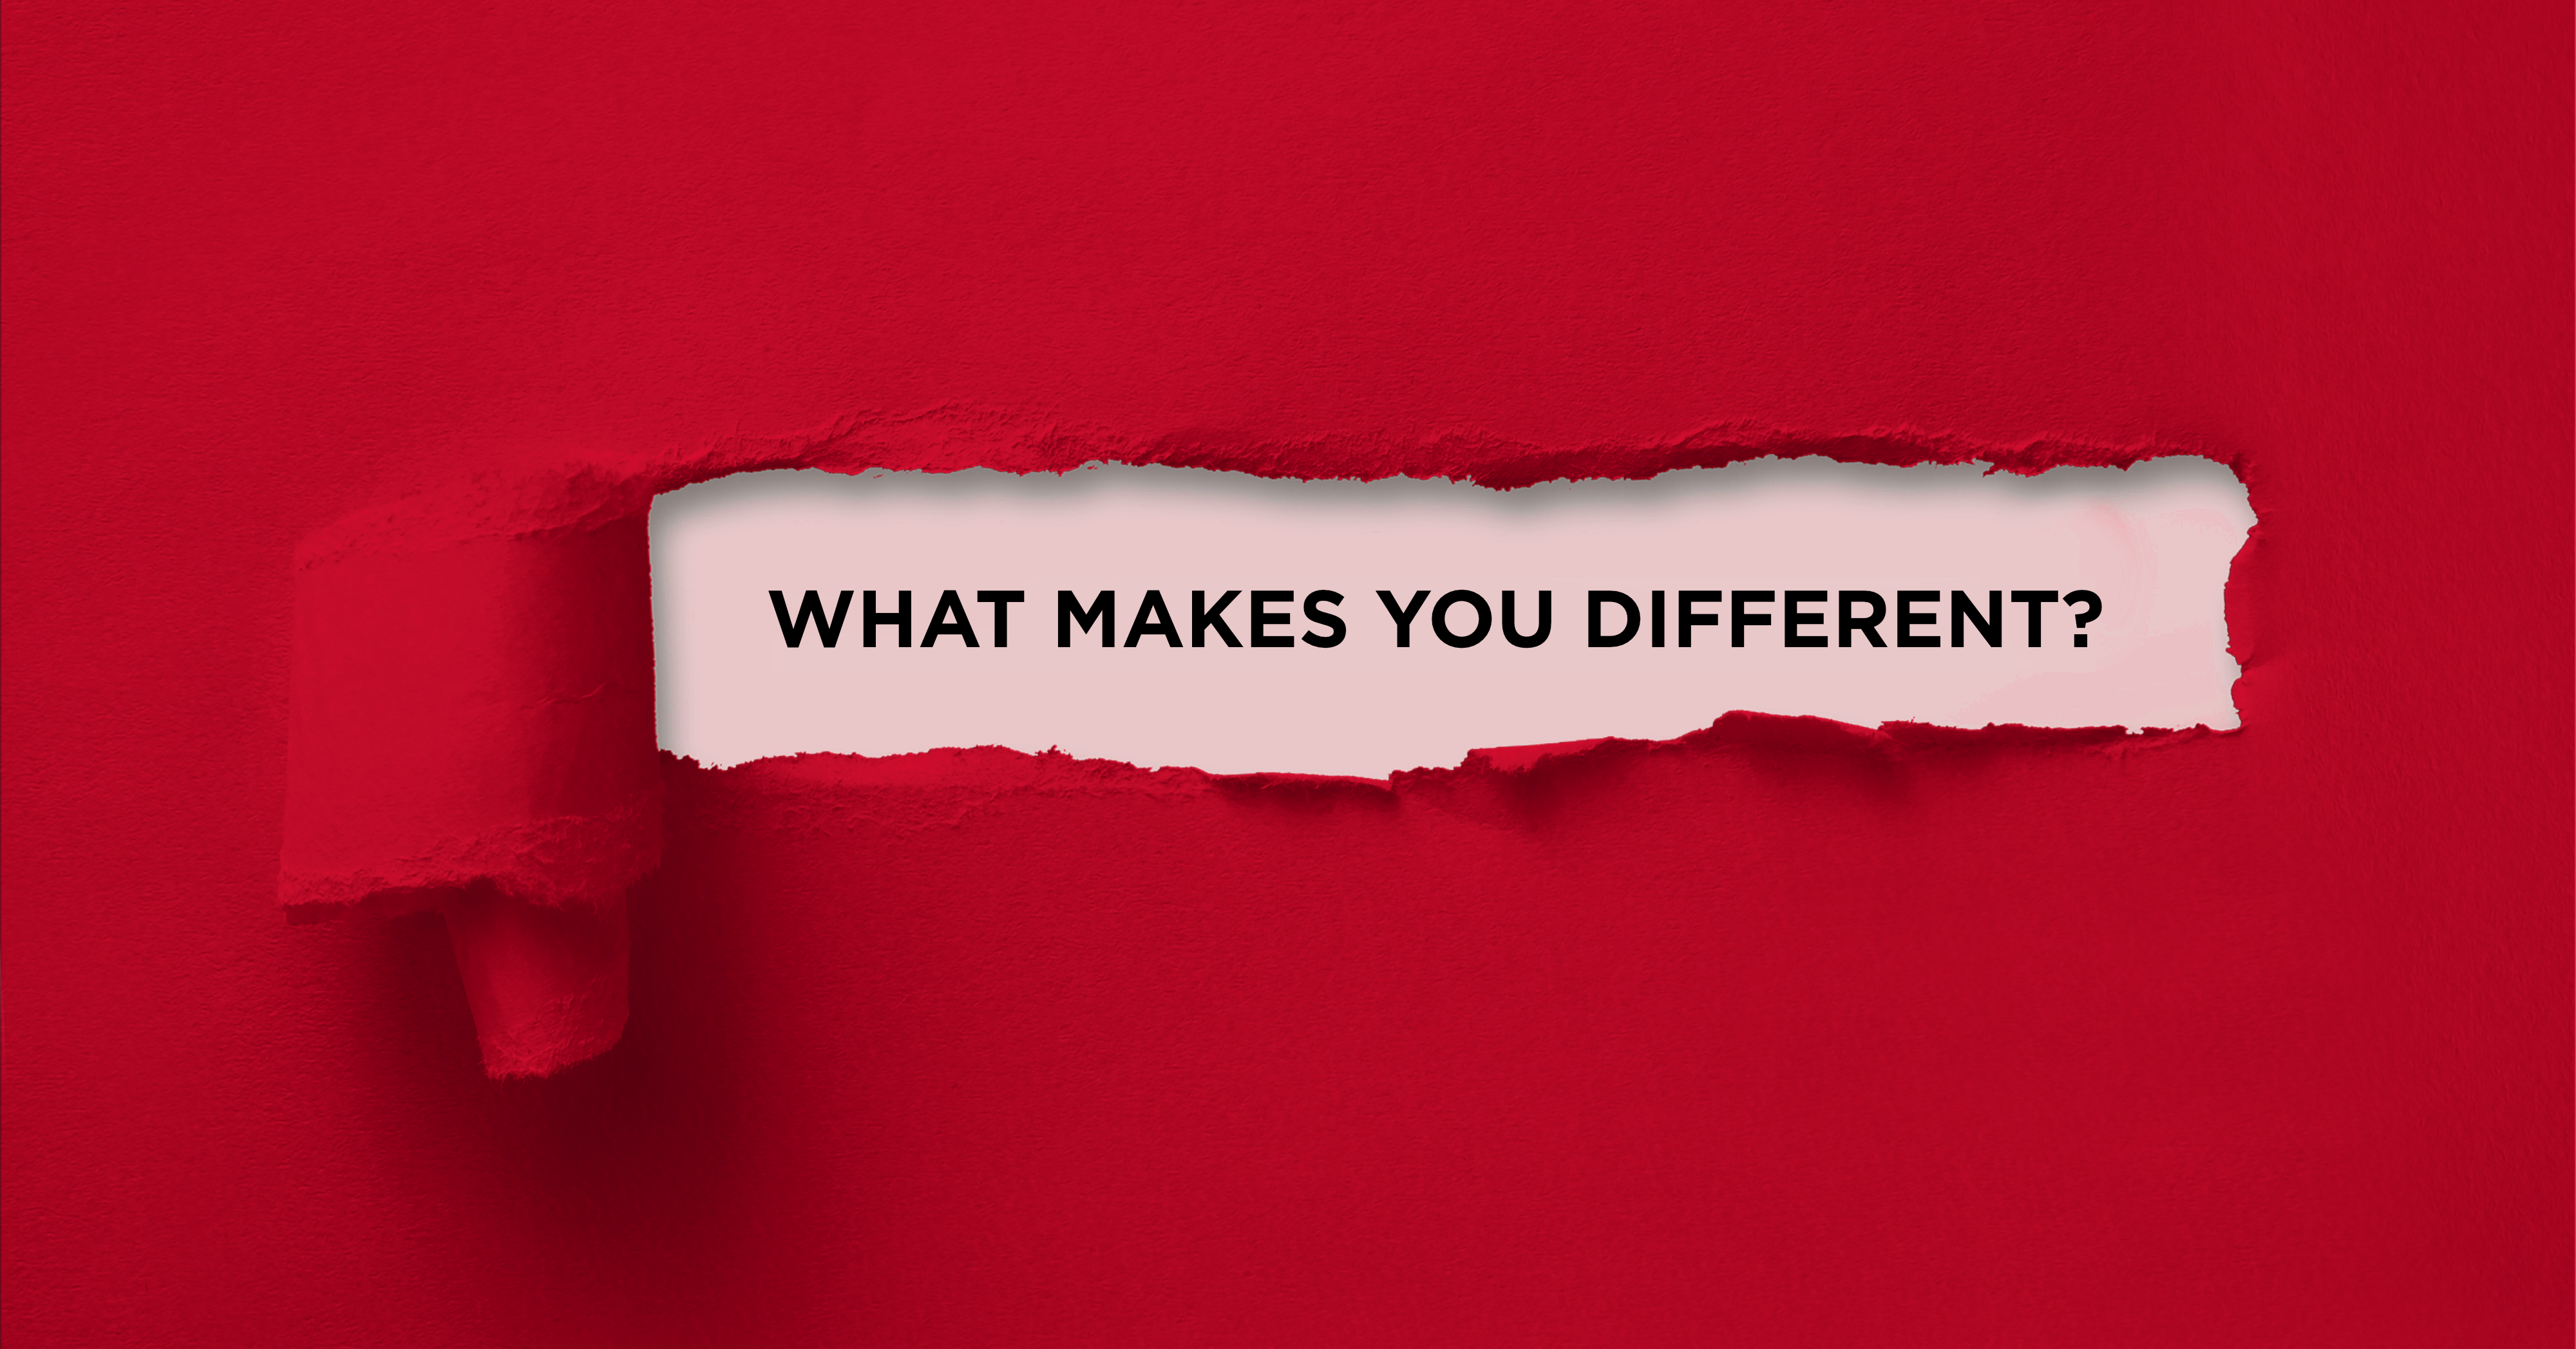 What makes you different?